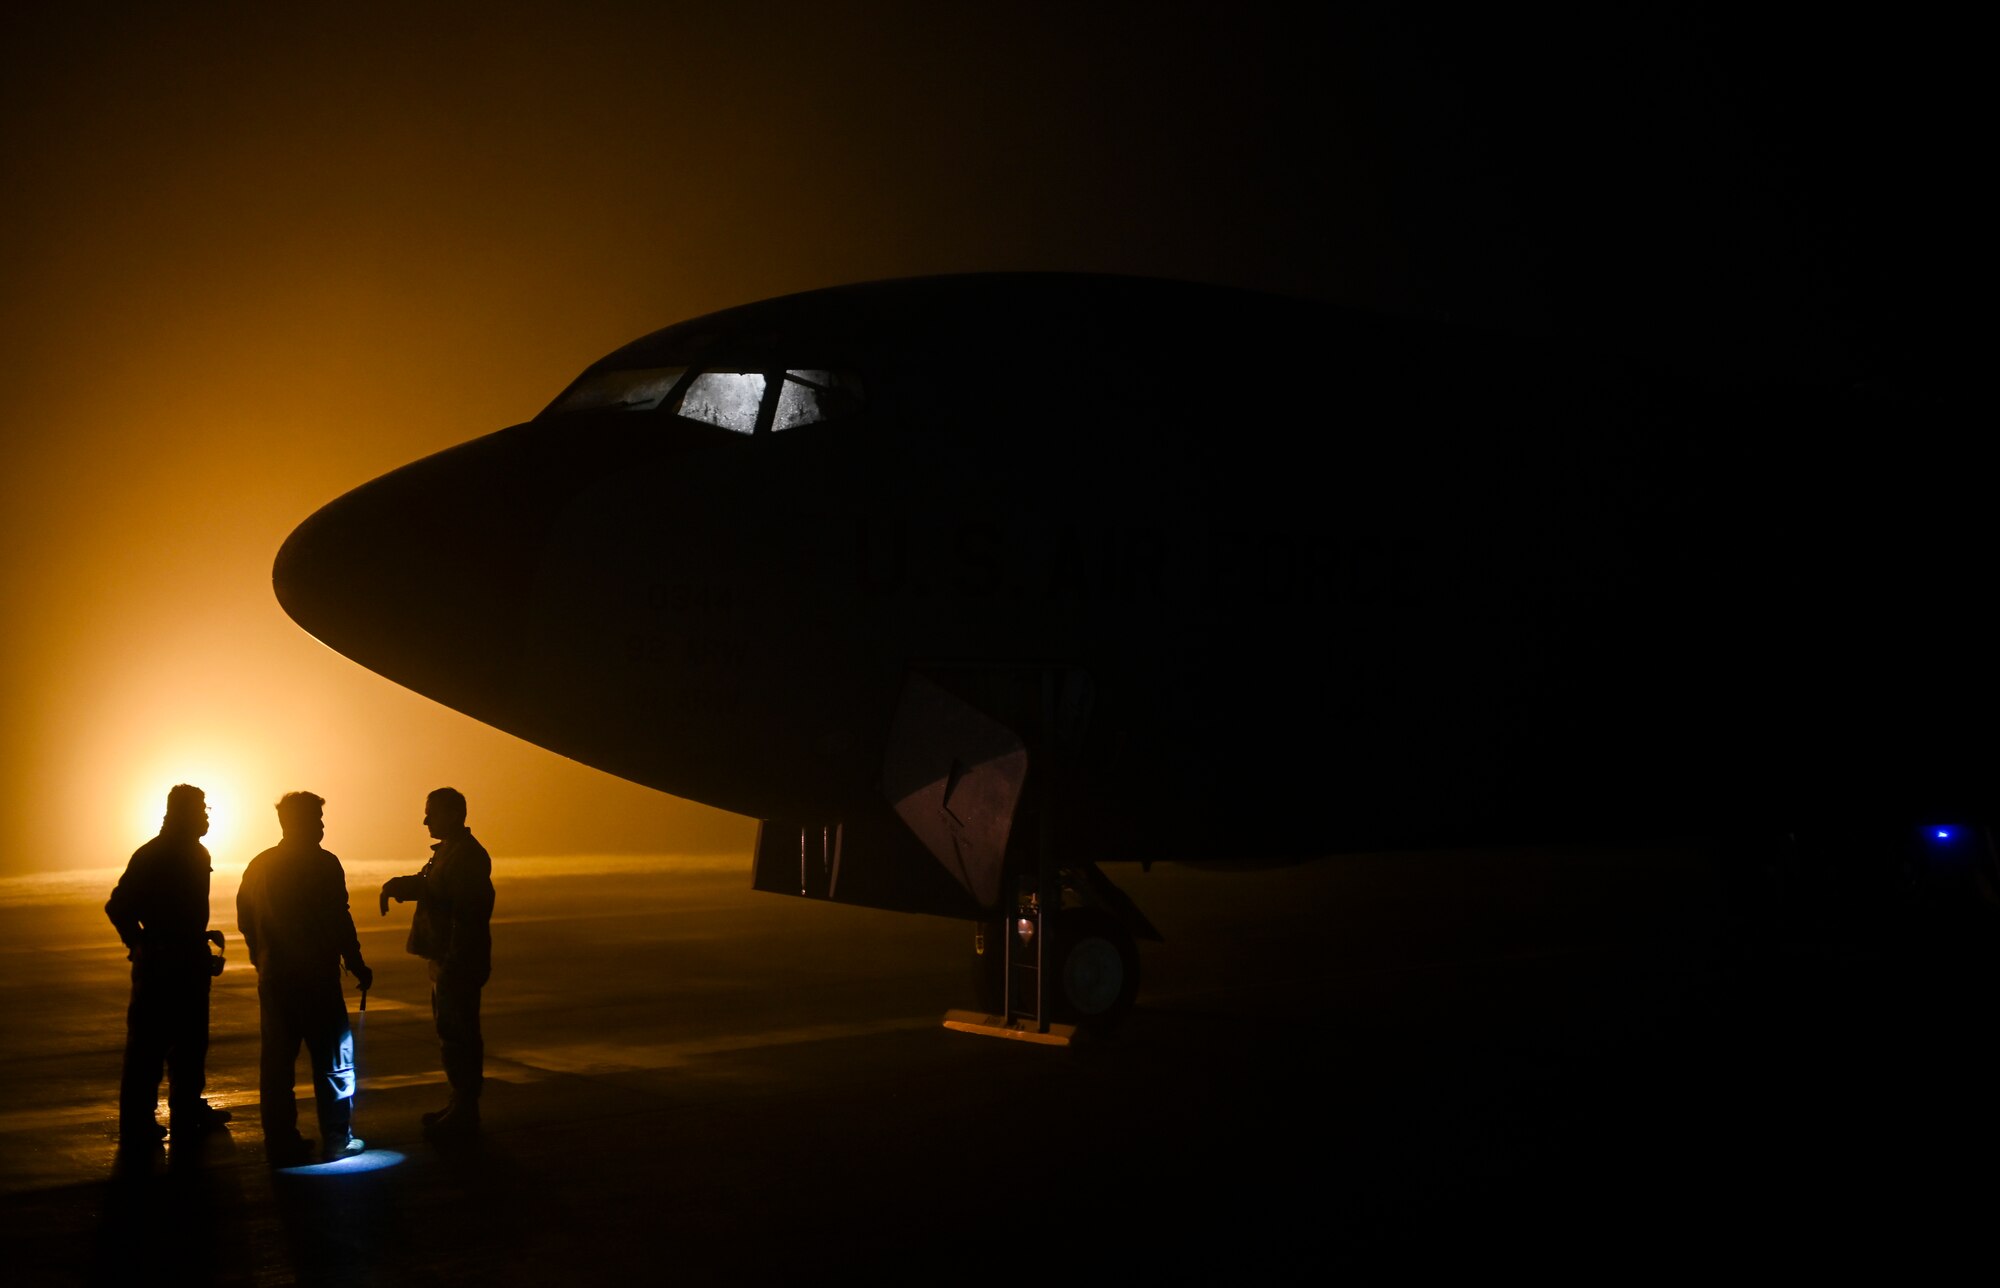 U.S. Airmen assigned to the 351st Air Refueling Squadron and the 100th Aircraft Maintenance Squadron prepare to inspect a KC-135 Stratotanker aircraft prior to a flight supporting a Bomber Task Force mission at Royal Air Force Mildenhall, England, April 12, 2021. Strategic bomber missions familiarize aircrew with air bases and operations in different geographic combatant commands’ areas of operation. (U.S. Air Force photo by Tech. Sgt. Emerson Nuñez)